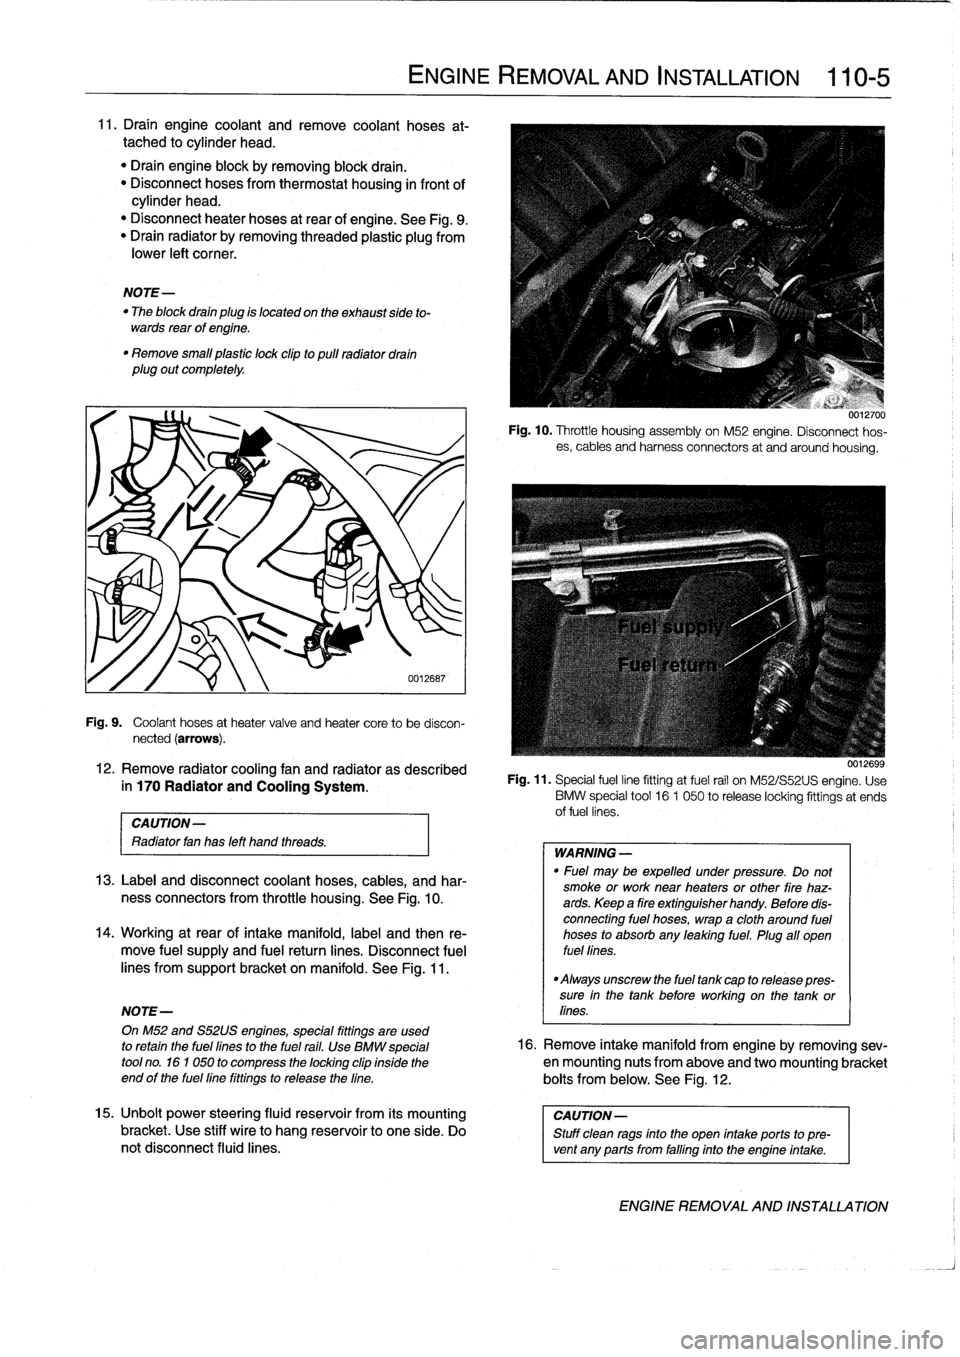 BMW 328i 1995 E36 Workshop Manual 
11
.
Draín
engine
coolant
and
Rmove
coolant
hoses
at-
tached
to
cylinder
head
.

"
Drain
engine
block
byremoving
block
drain
.
"
Disconnect
hoses
from
thermostat
housing
in
front
of
cylinder
head
.
